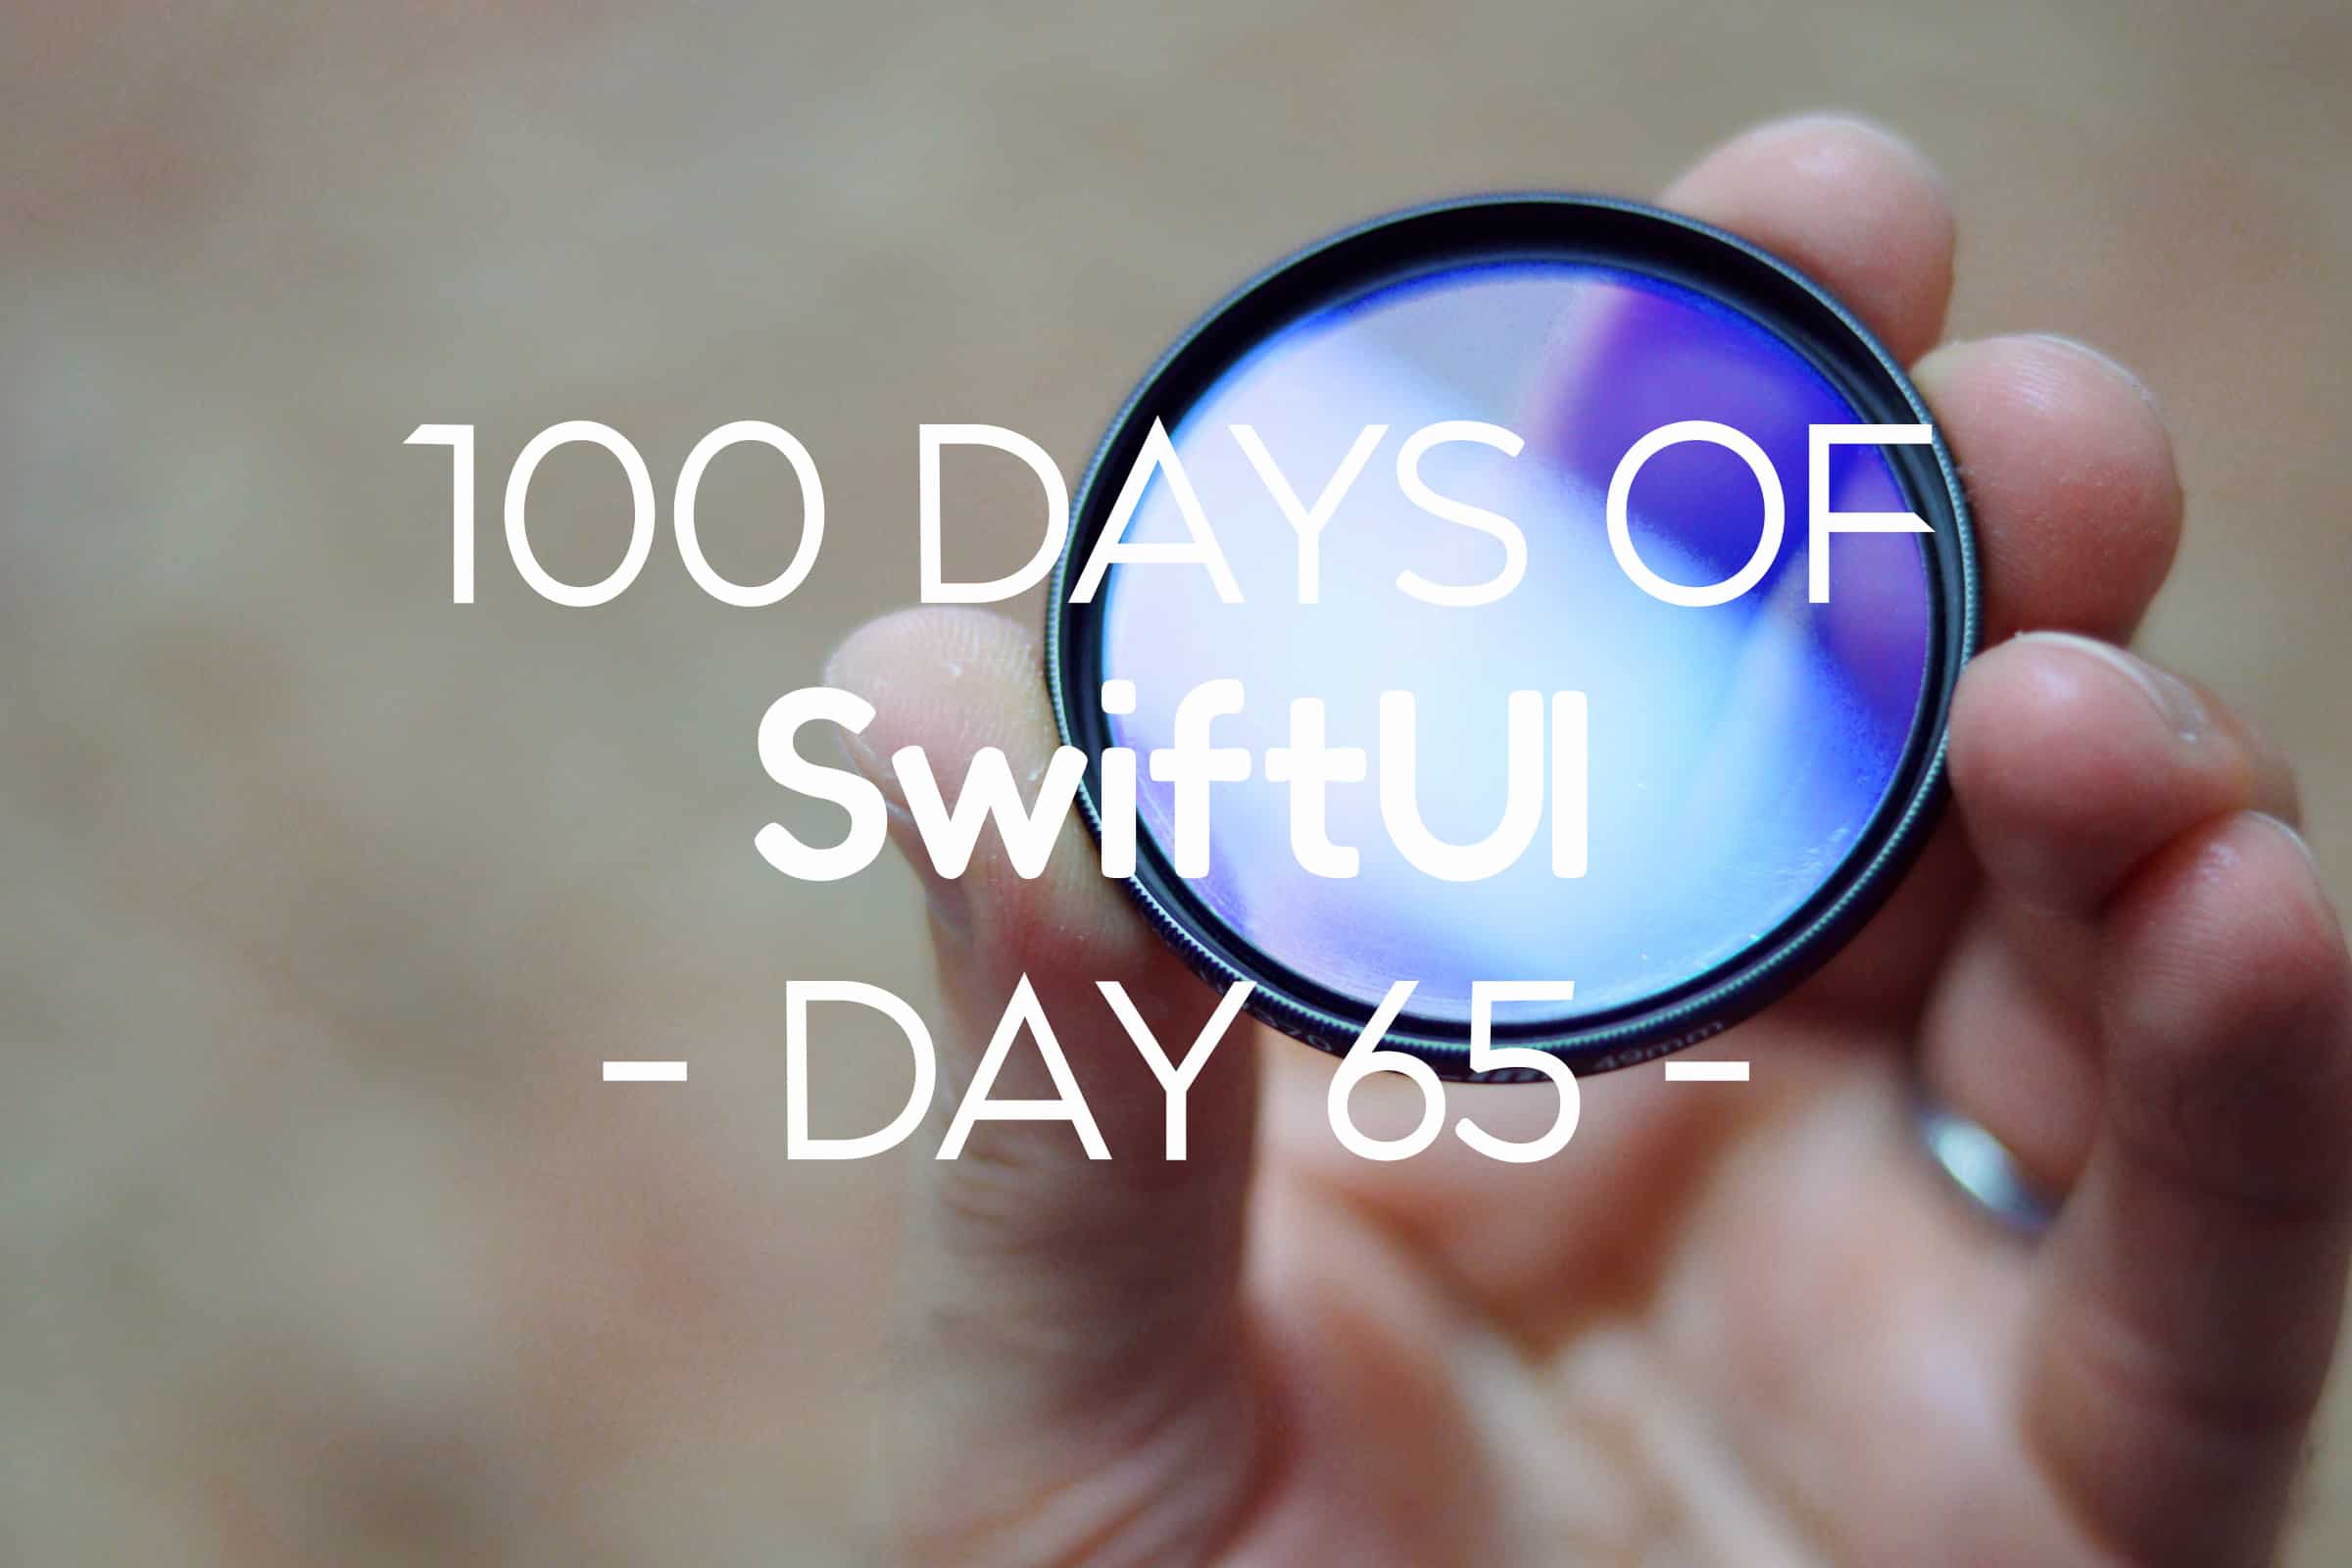 100 Days of SwiftUI Day 65